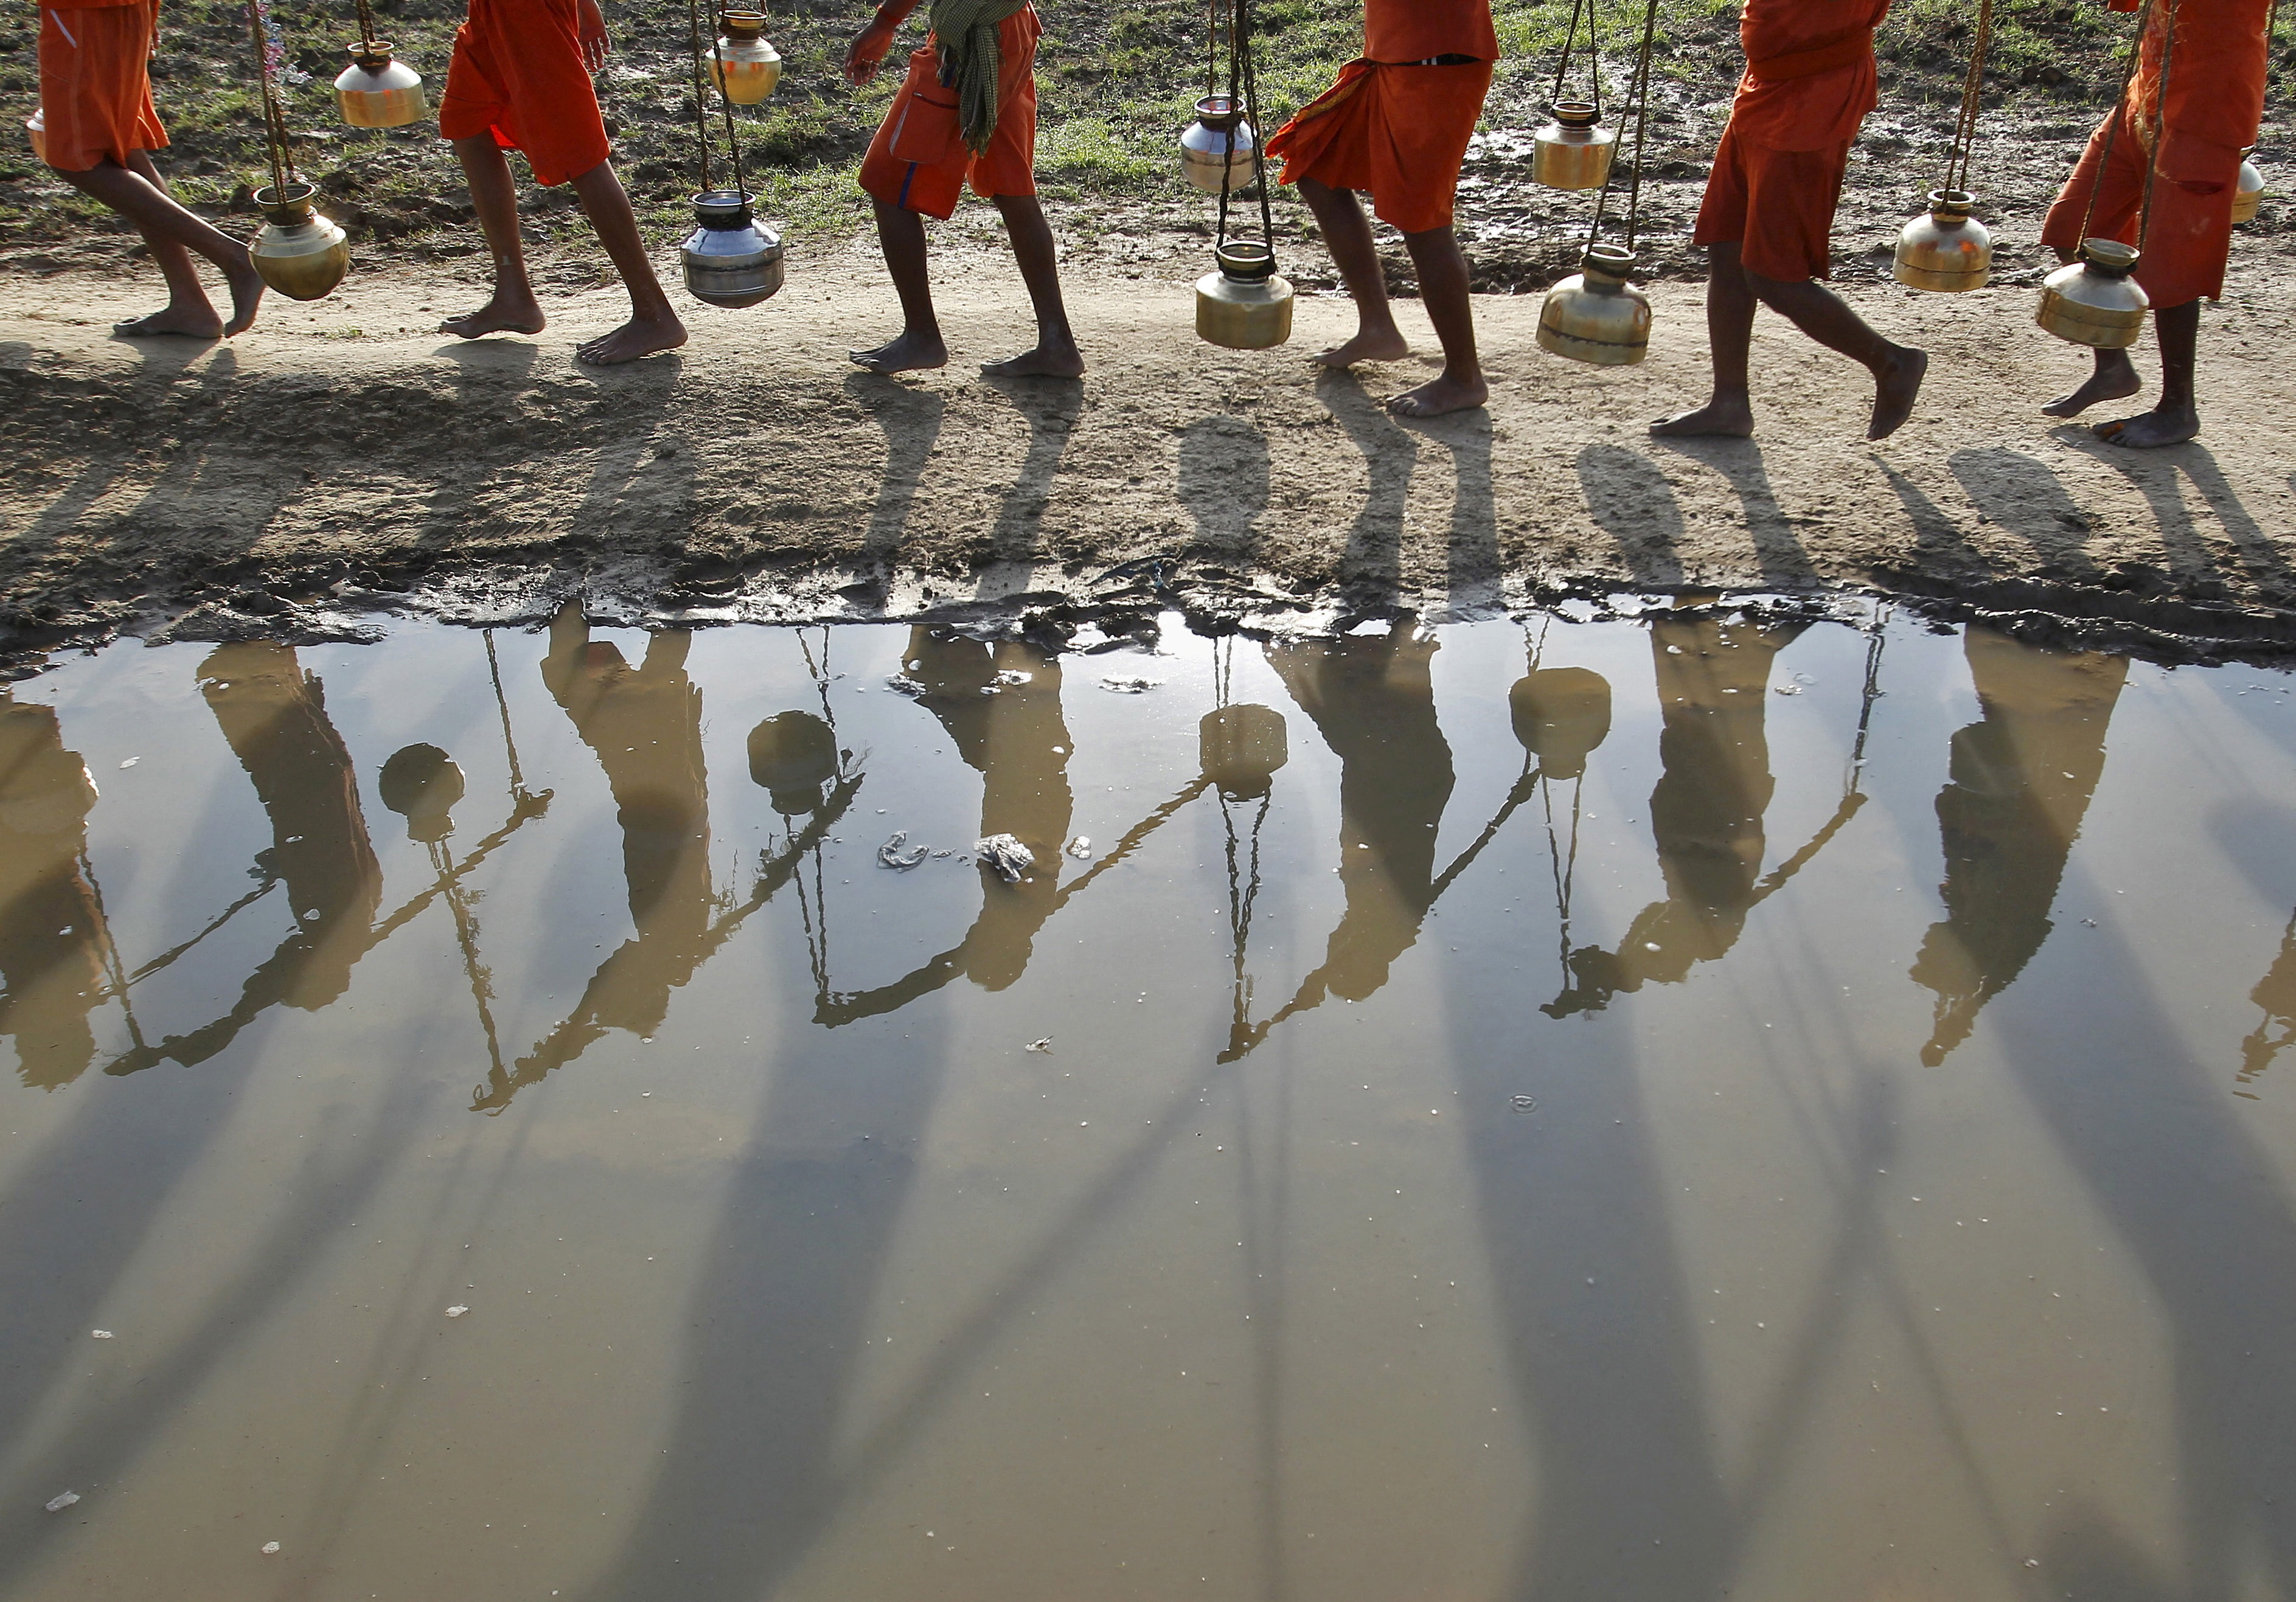 Kanwarias or devotees of Hindu god Shiva carrying pitchers are reflected in a puddle as they walk after filling the pitchers with water from the river Ganges in Allahabad